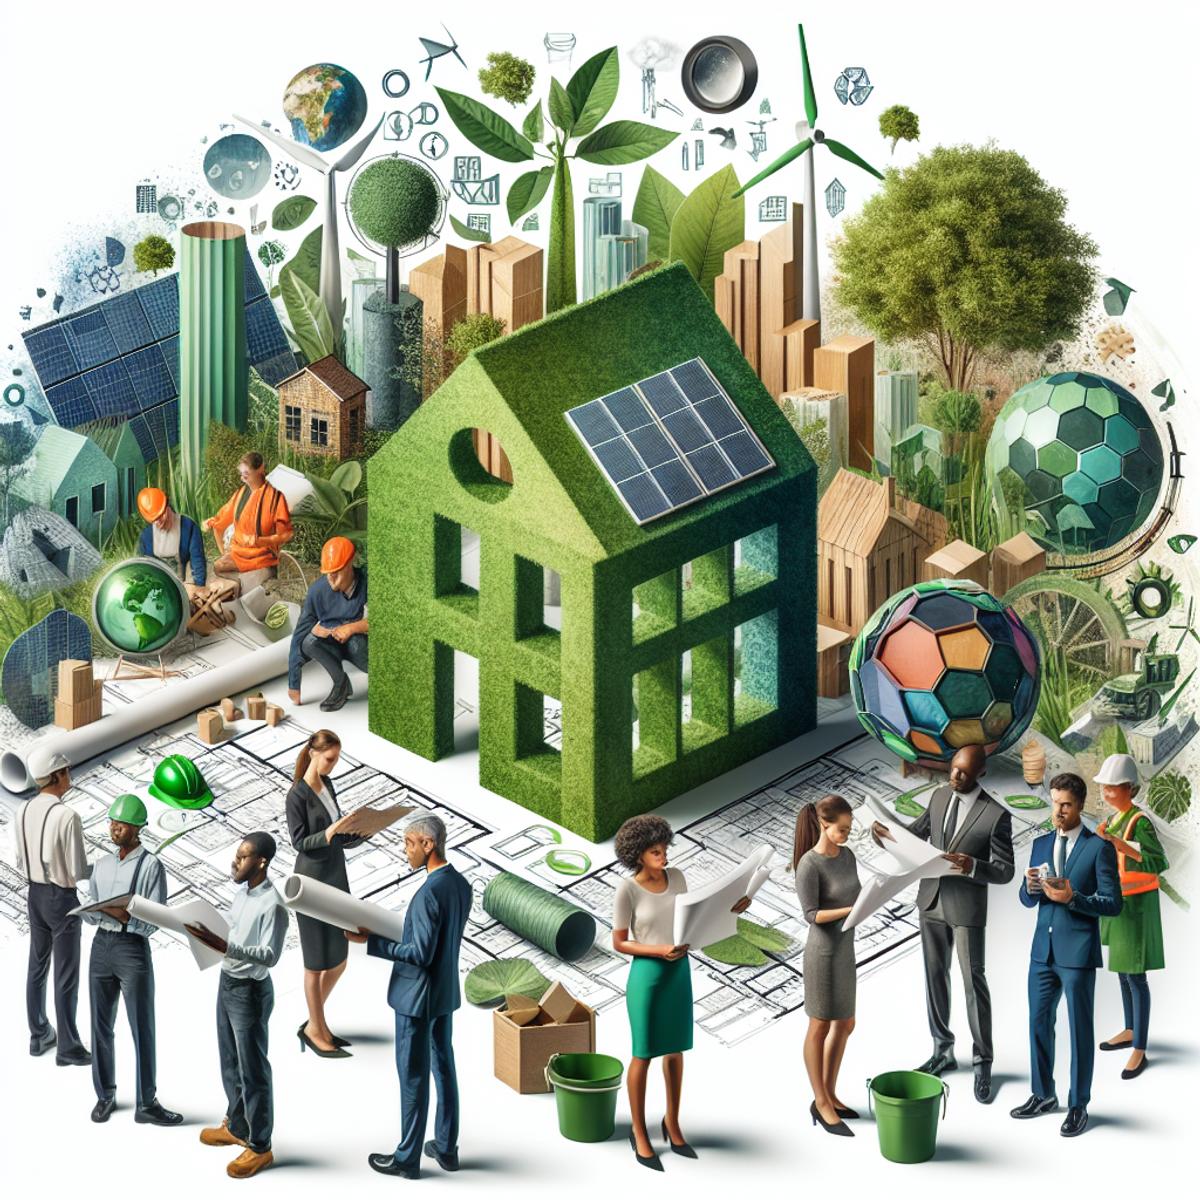 A diverse group of green building consultants analyzing blueprints surrounded by solar panels, wind turbines, a model of a green building, and environmentally friendly construction materials.